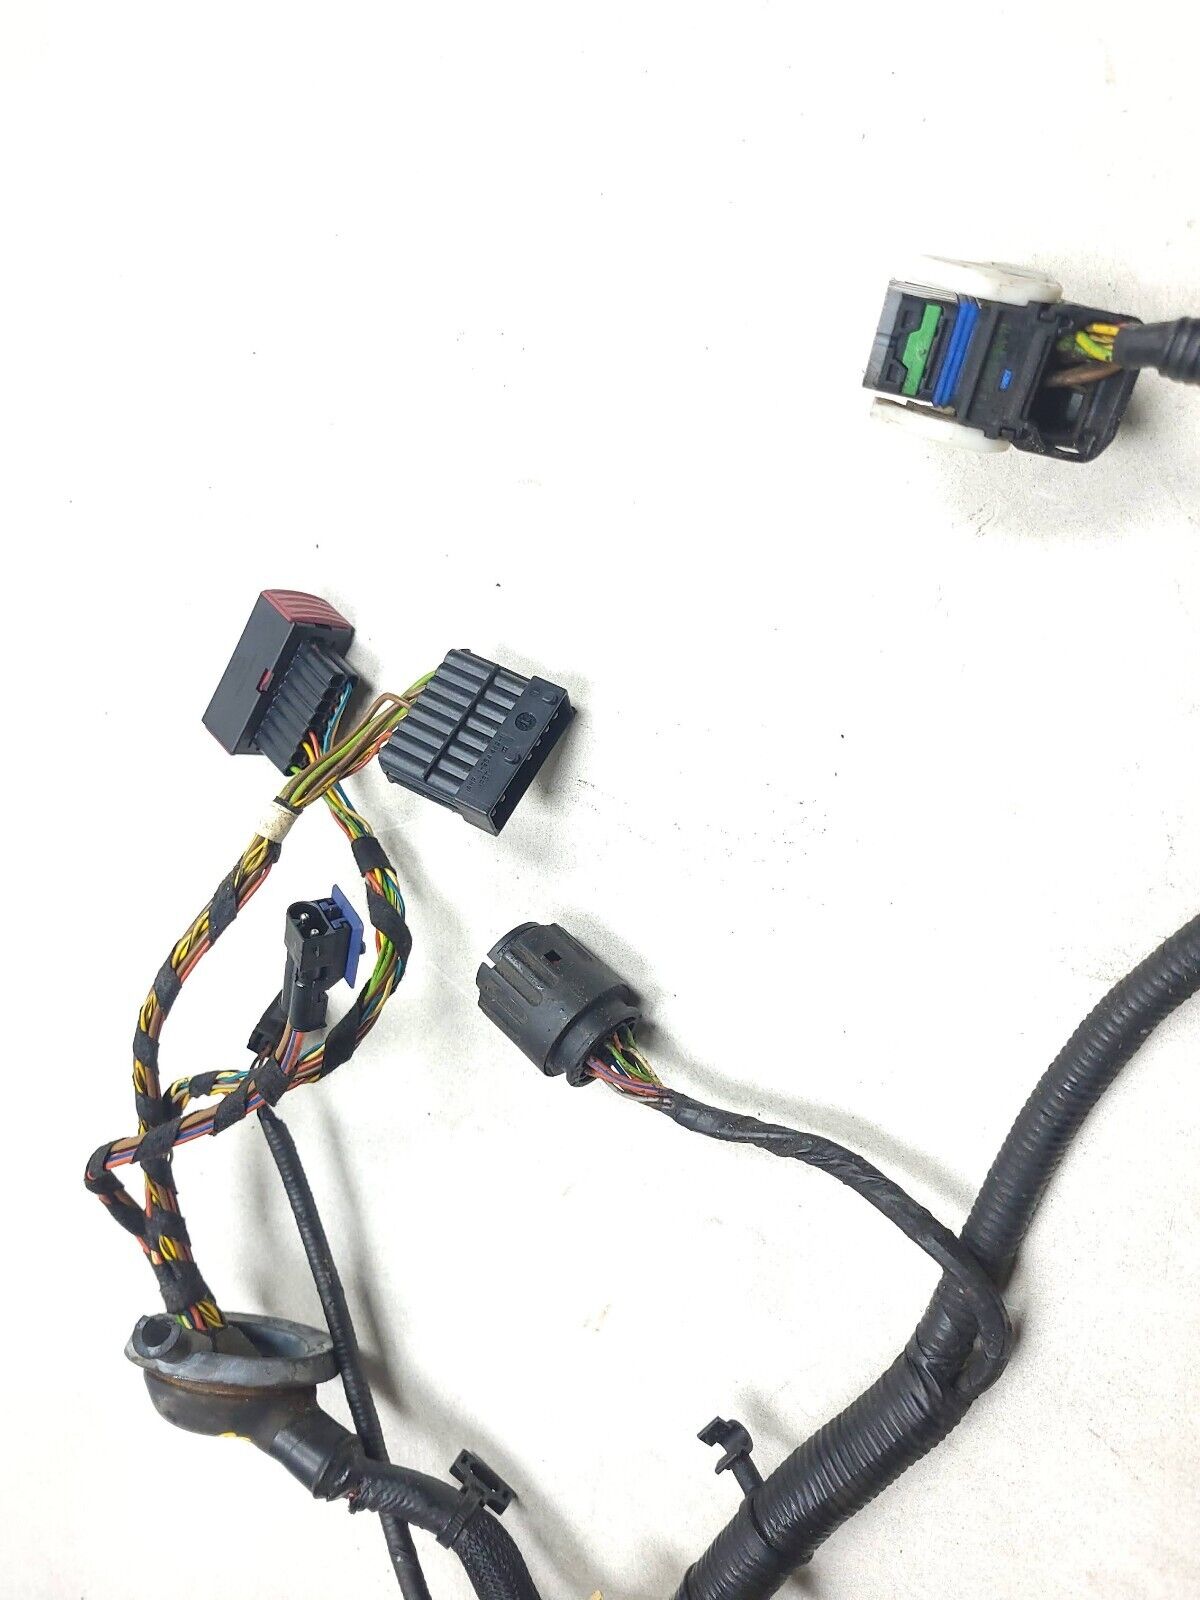 2006-2009 Range Rover Rear Differential Wire Harness 4.2l OEM